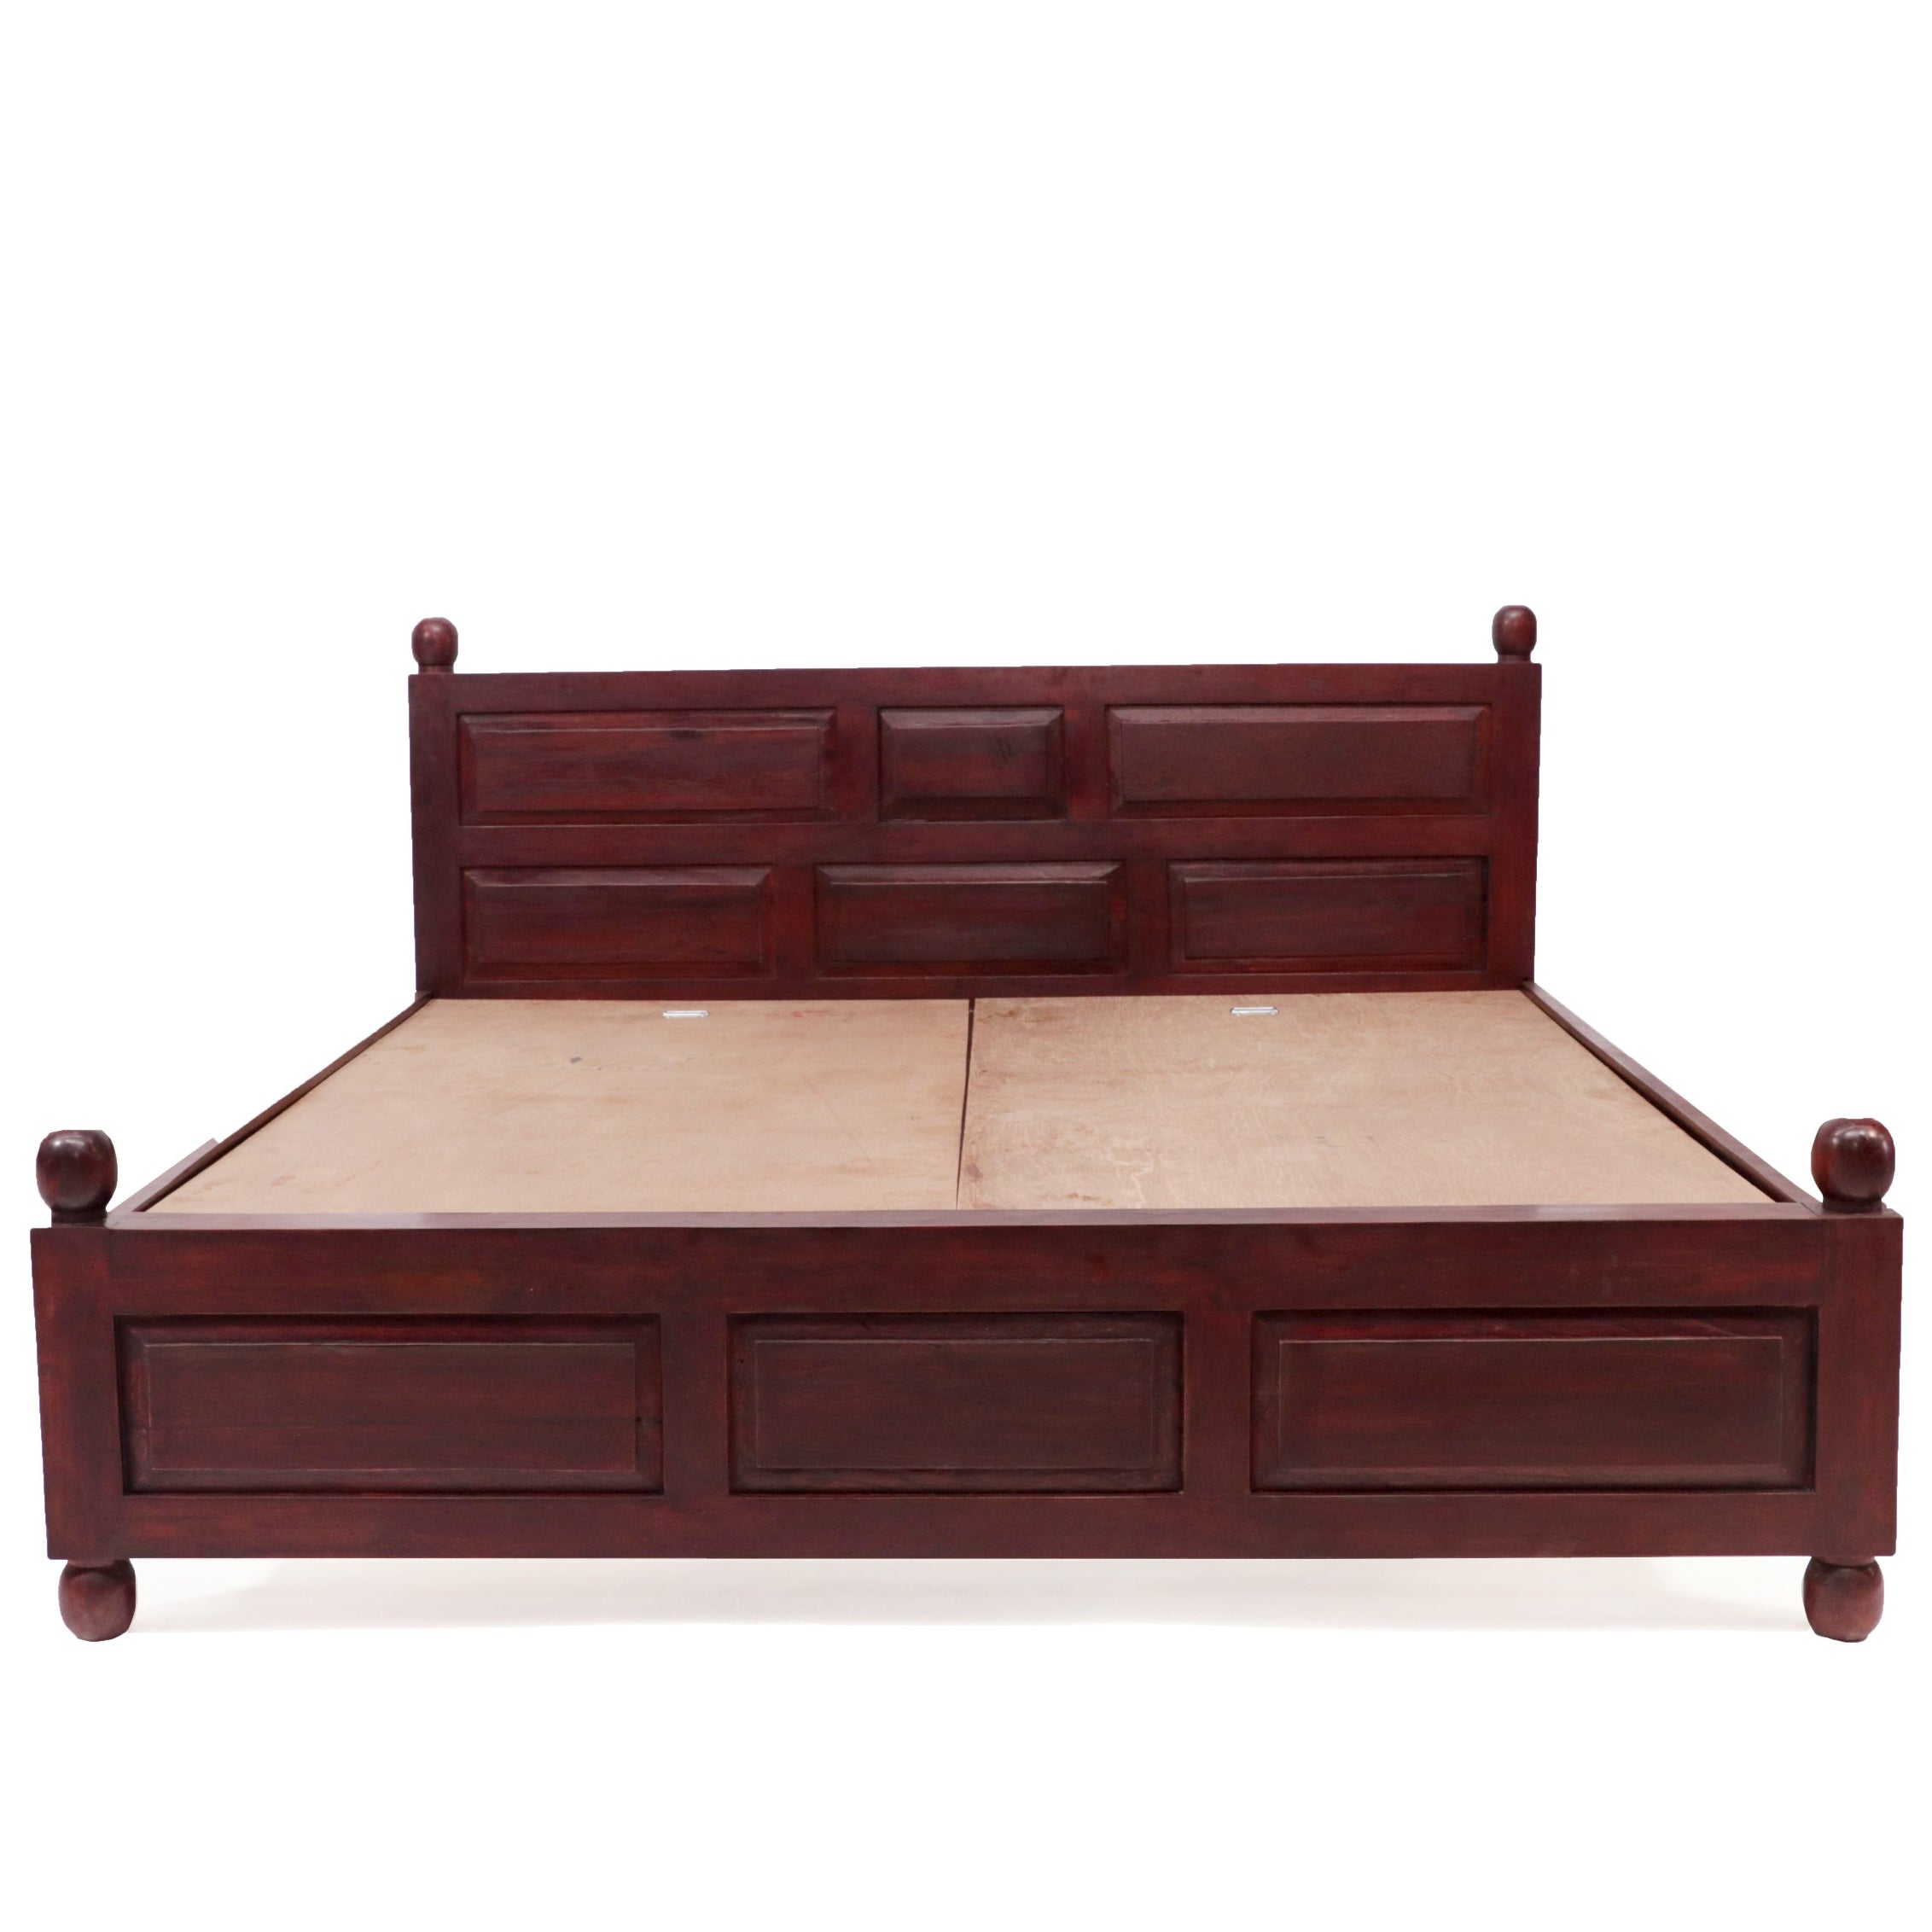 Wooden Plain Classical Bed Bed